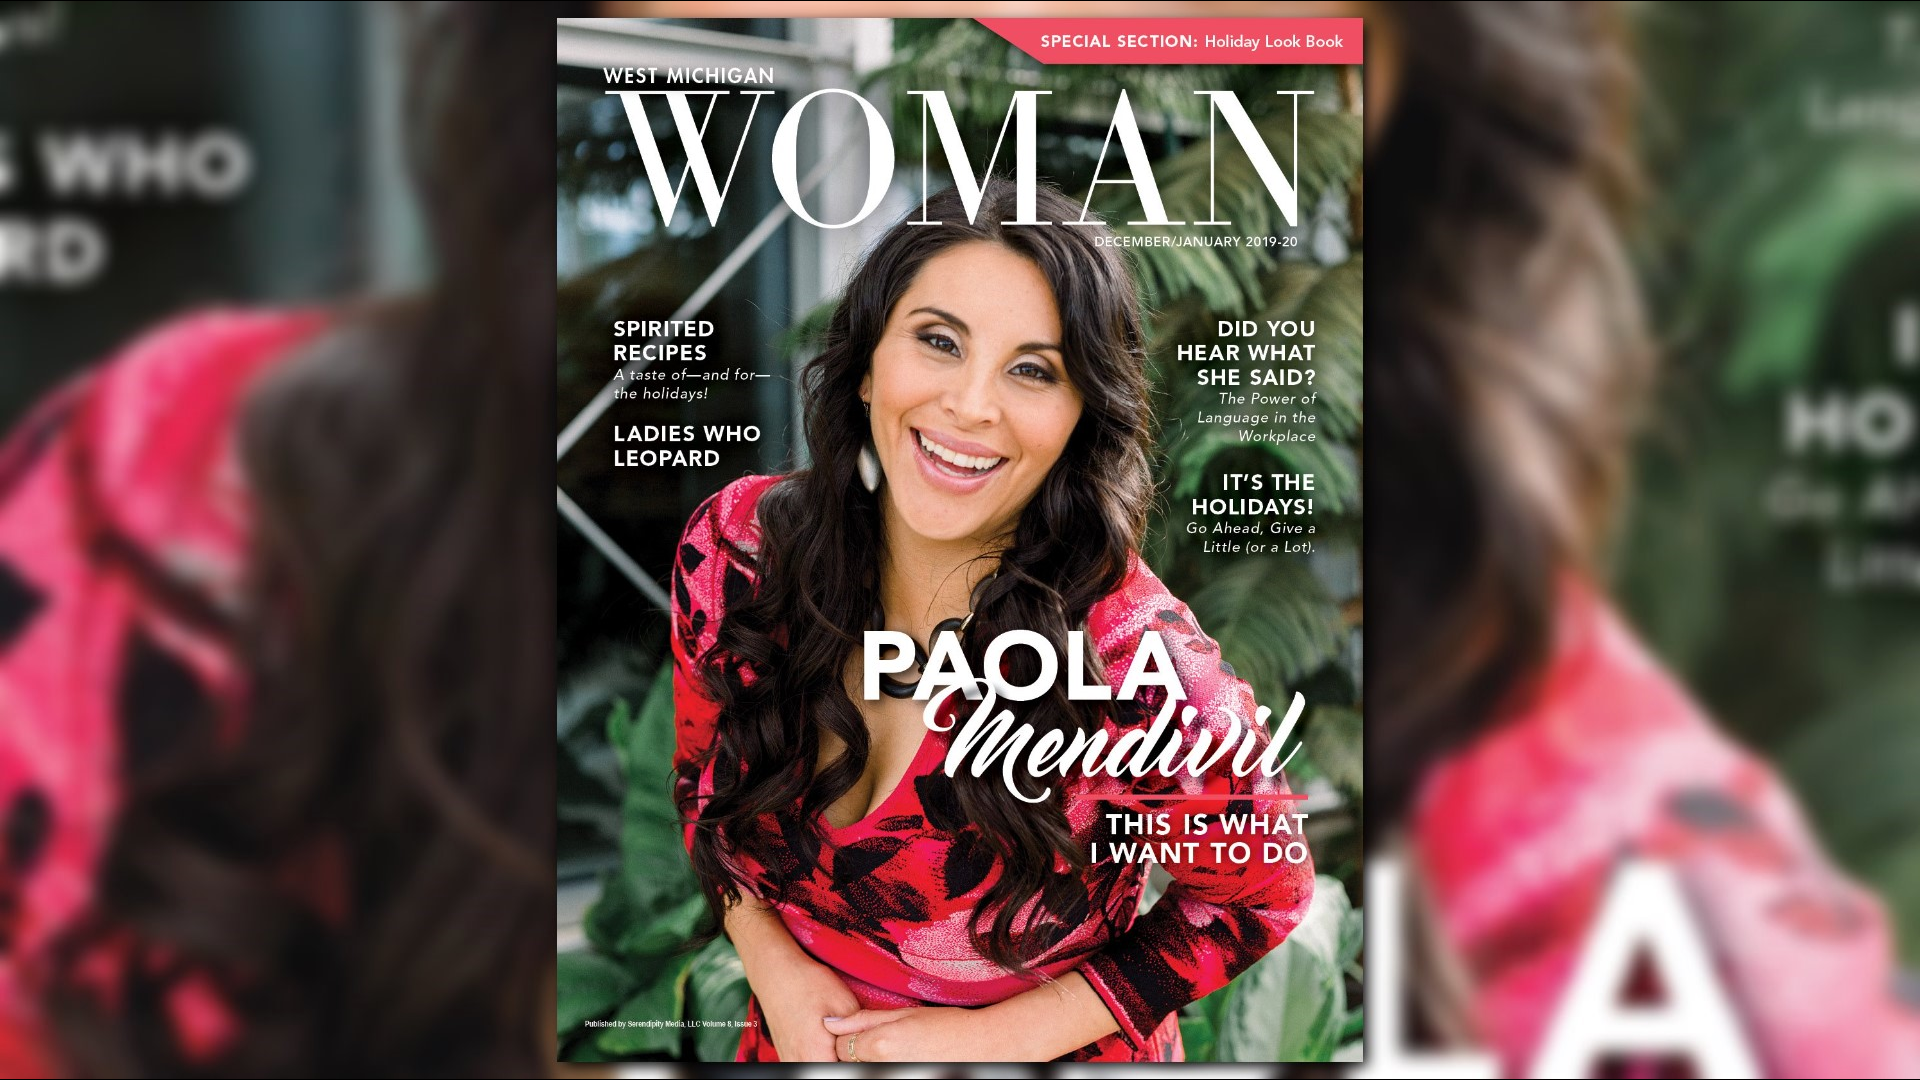 Kasie Smith and Paola Mendivil talk with us about this month's edition of West Michigan Woman.